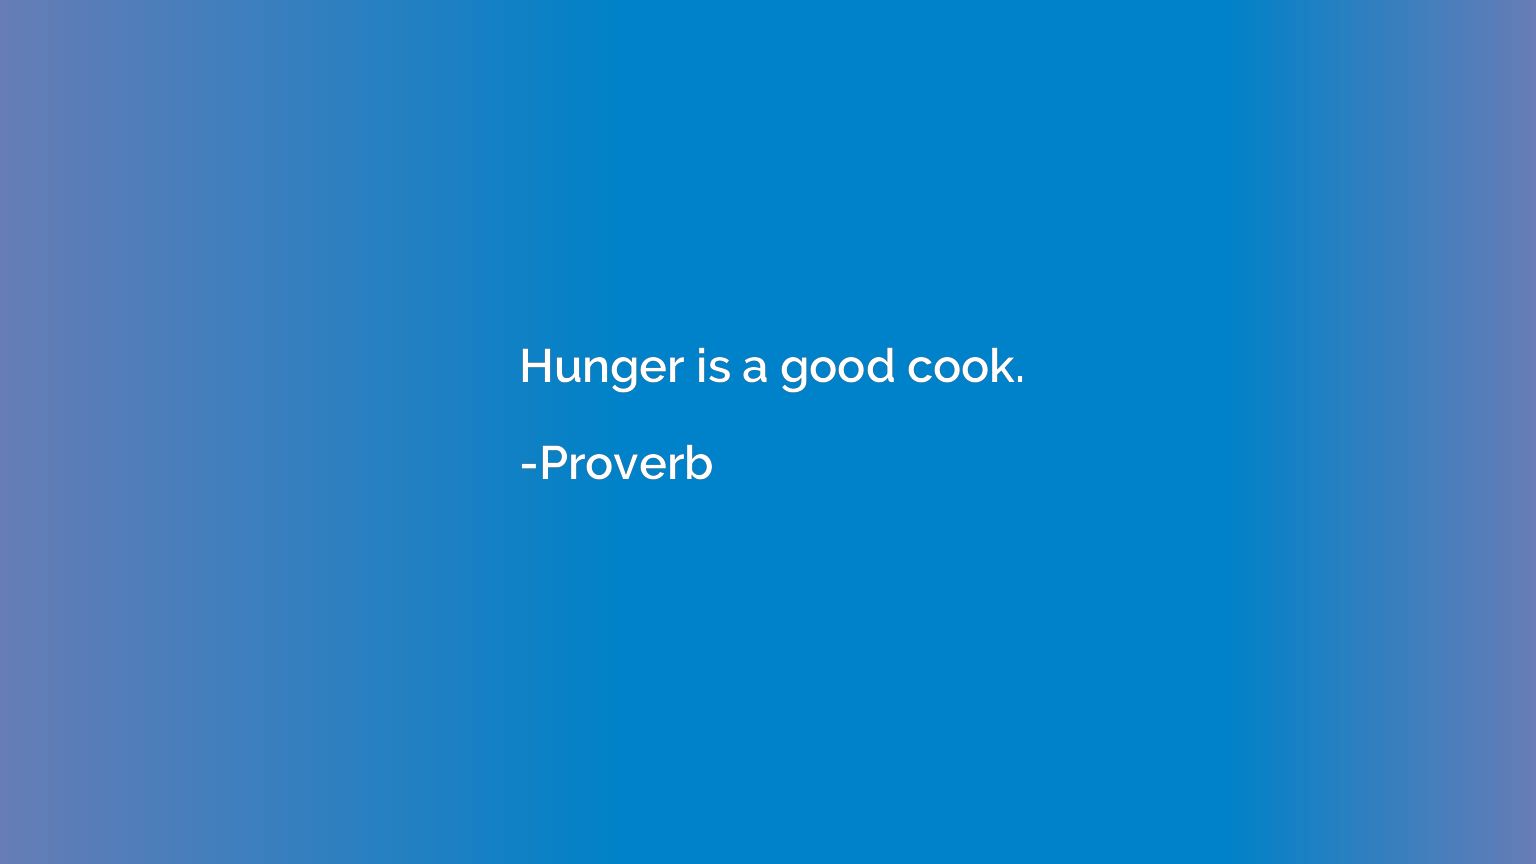 Hunger is a good cook.